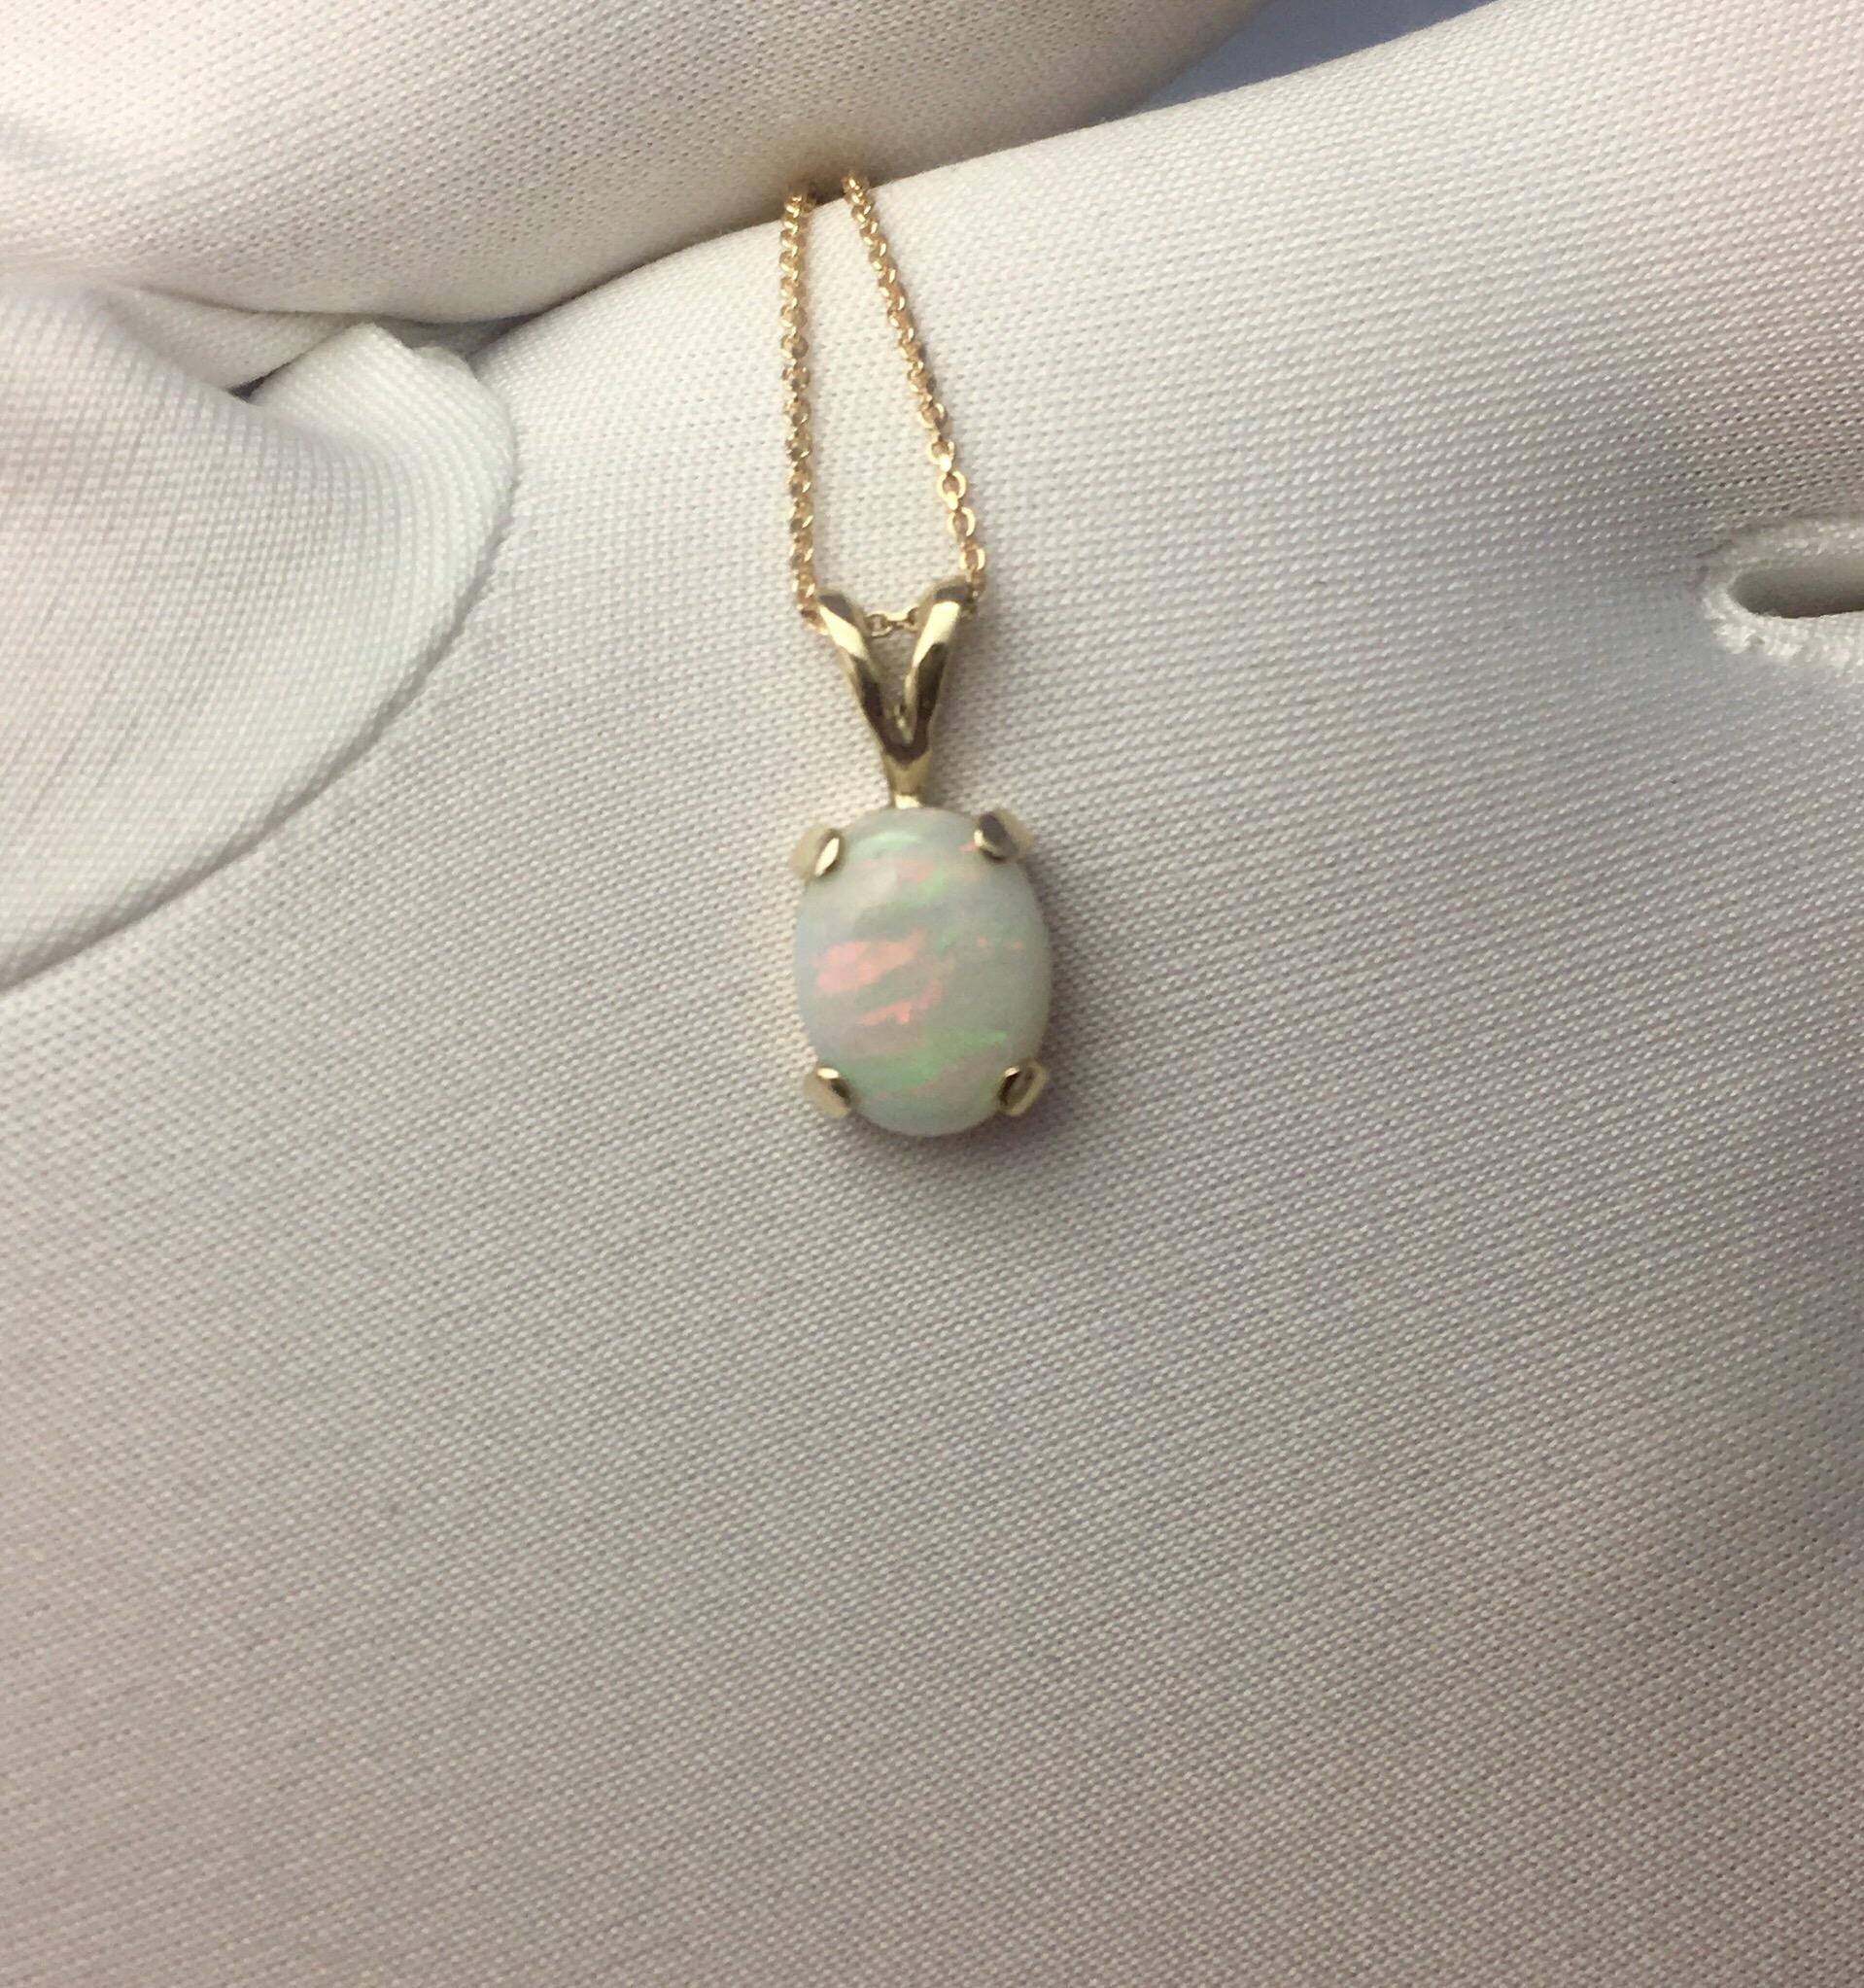 Beautiful fine Cooper Pedy white opal with stunning play of colour.
Set in a fine 14k yellow gold solitaire pendant.

Stunning Australian opal with an excellent polish and lots of colour flash. Blues, greens, oranges, yellow, purple, reds... this